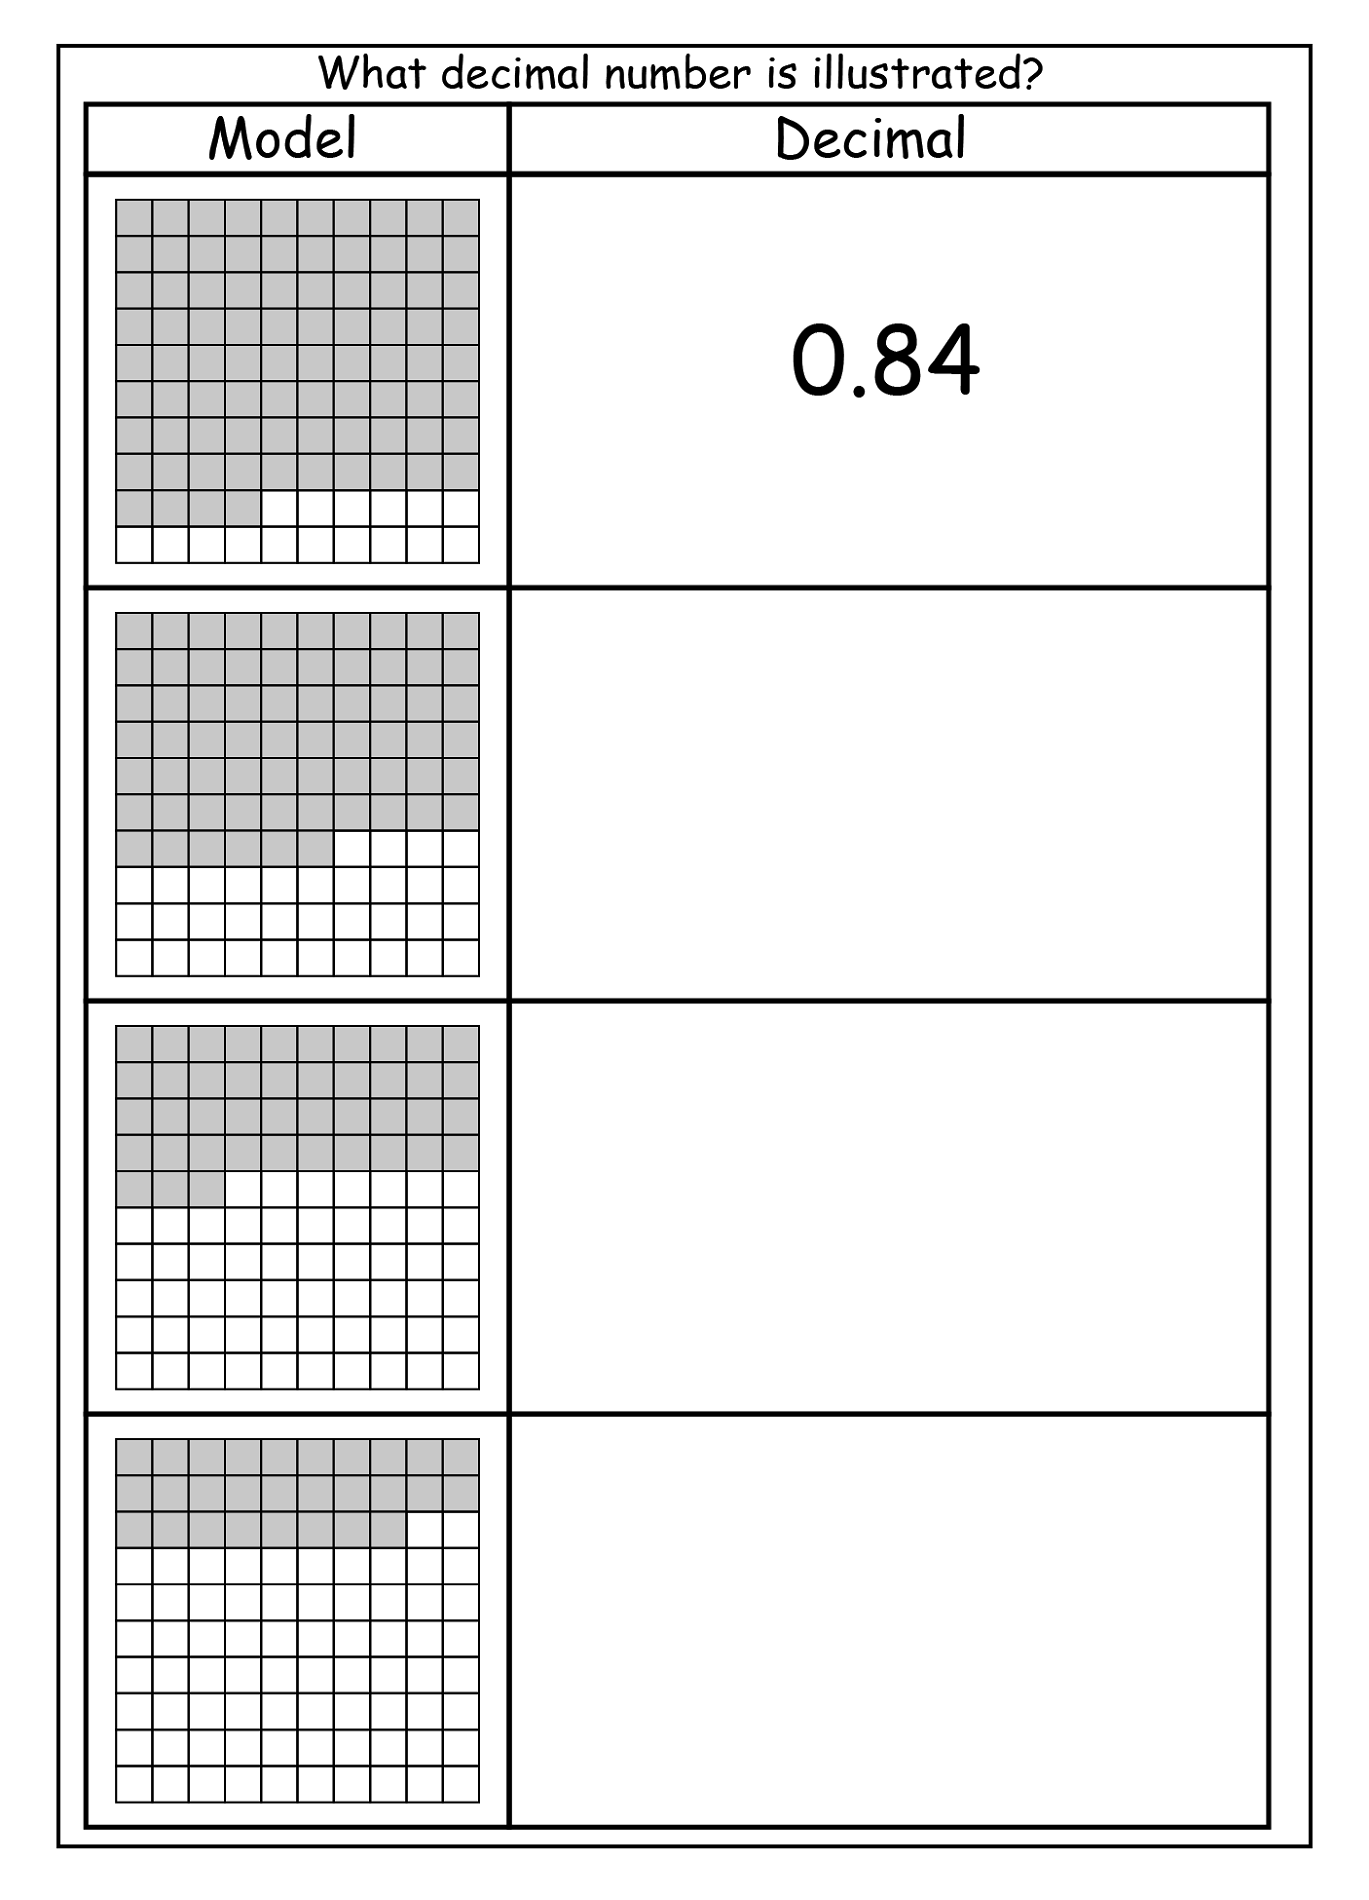 Equivalent Fraction Patterns Fraction And Decimal Worksheets For Year Year 6 Decimals To